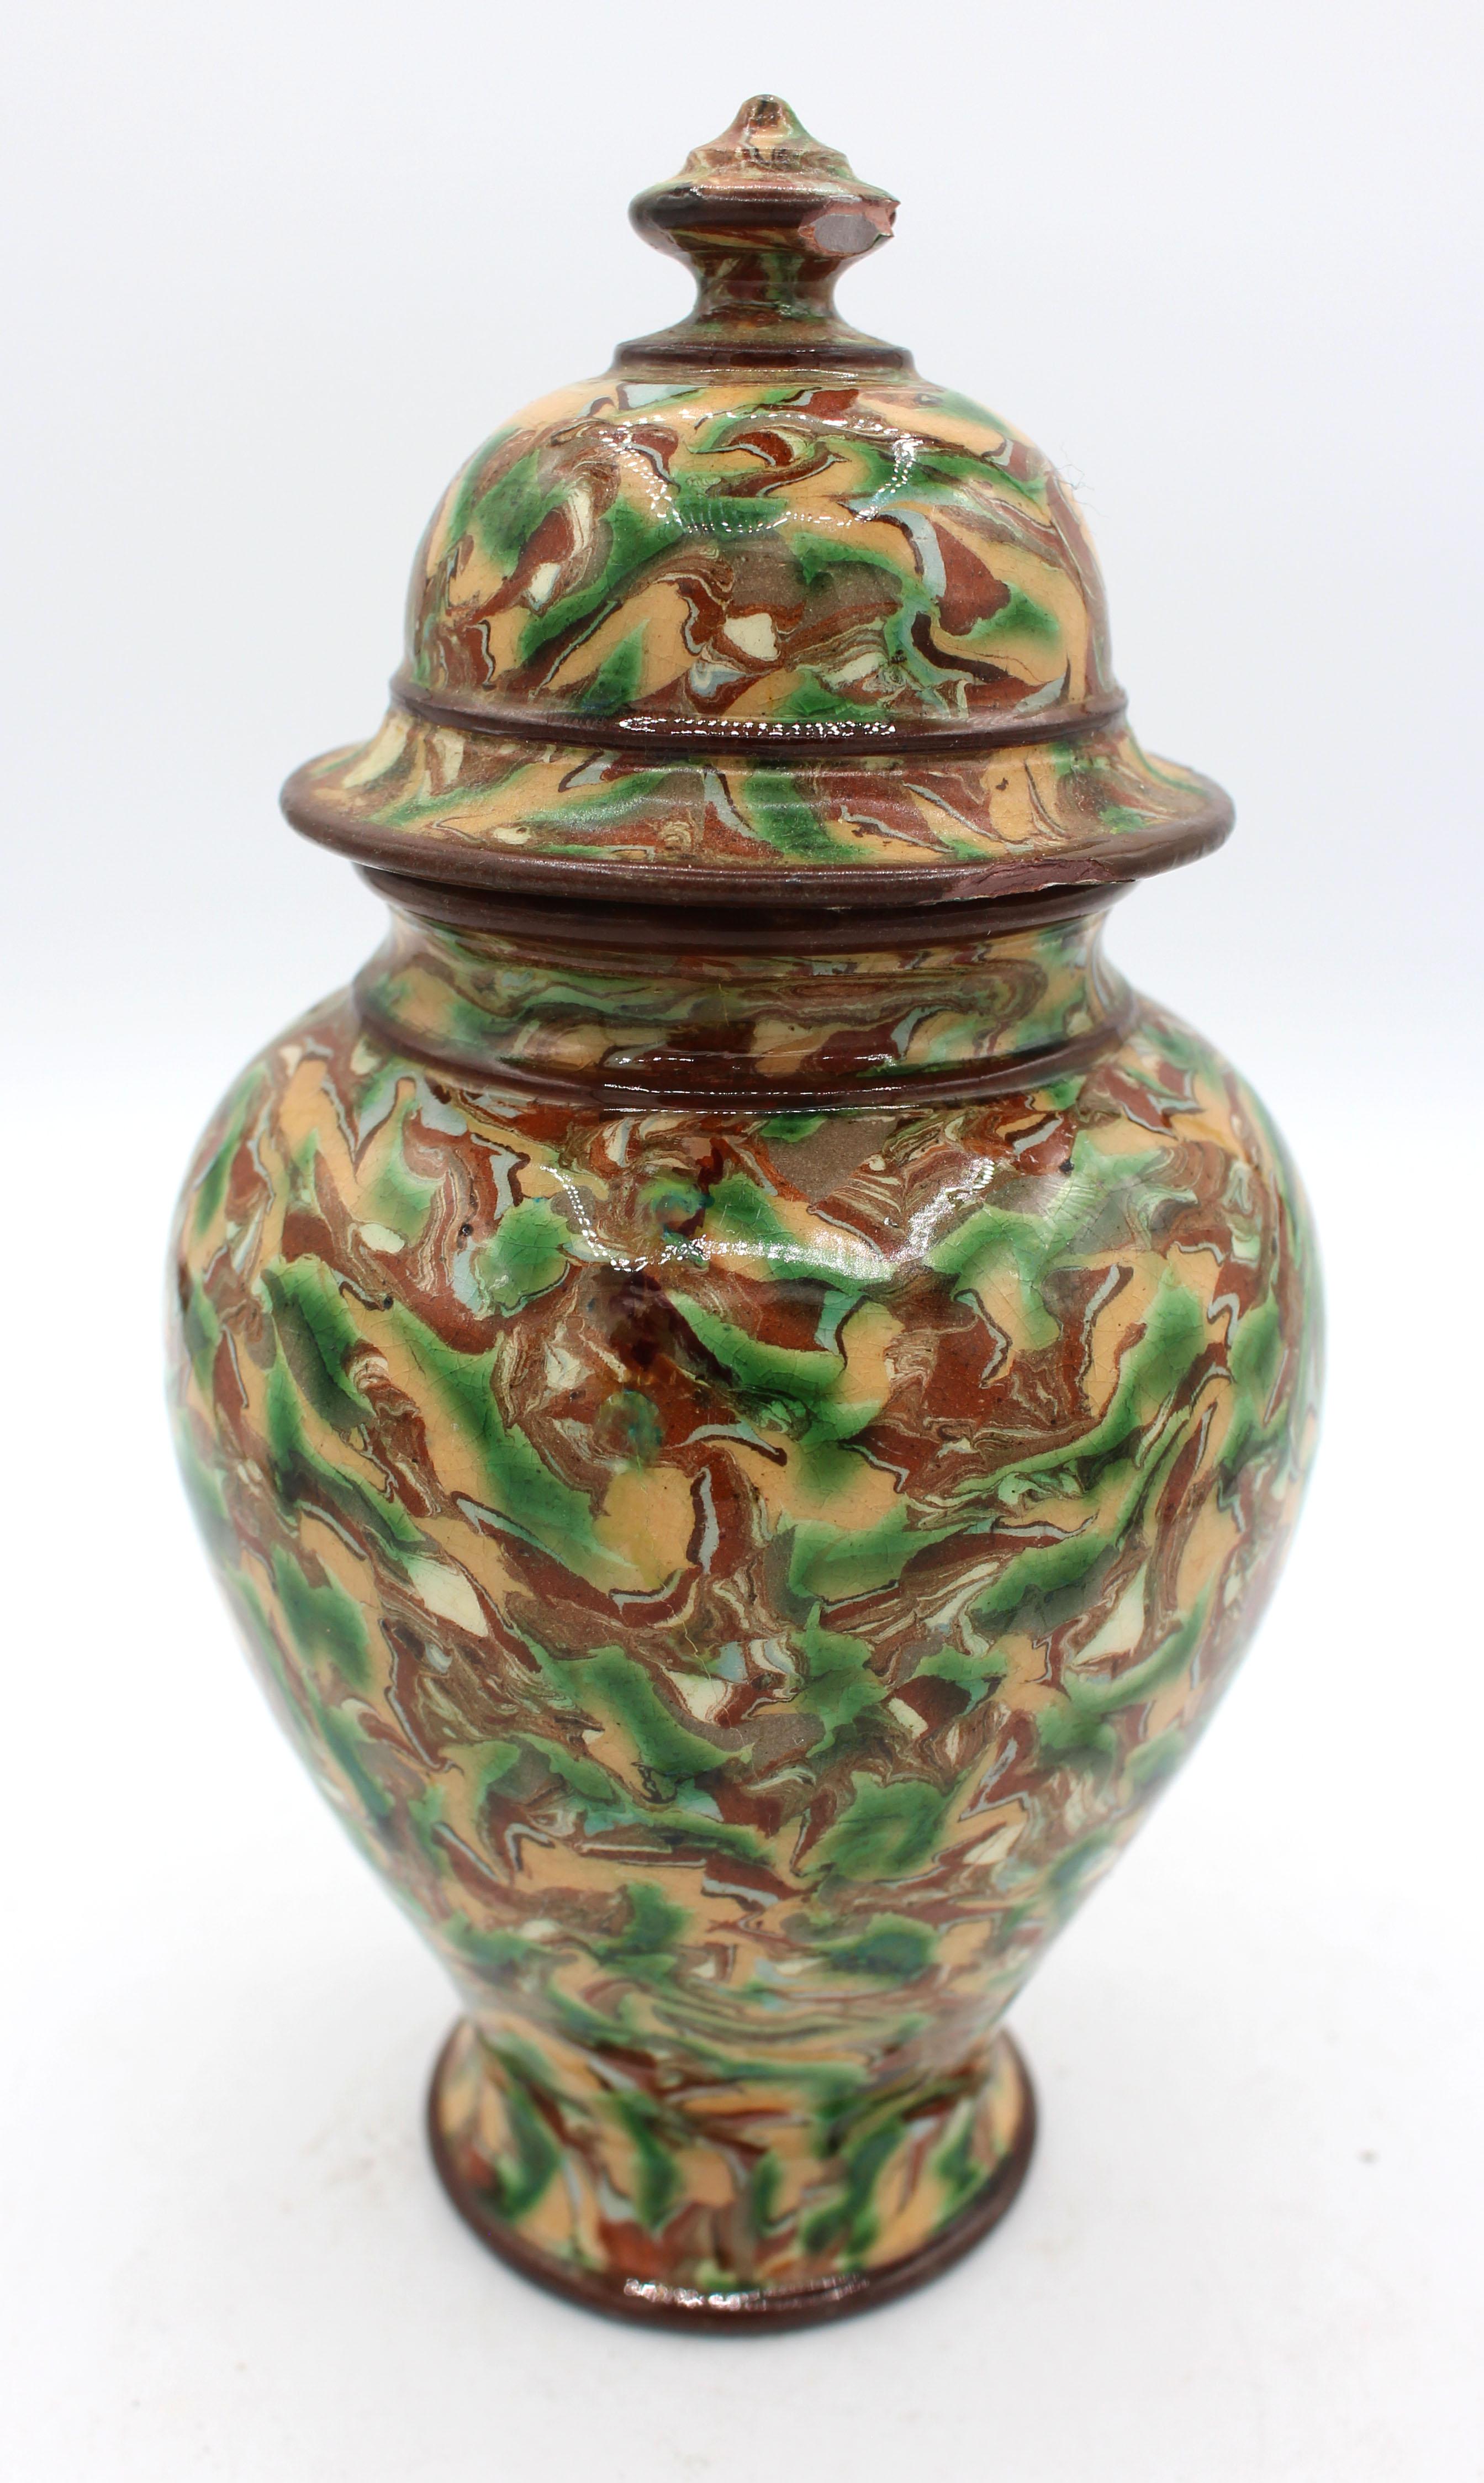 Circa 1900 Terracotta Covered Jar, French, by Maison Pichon Uzes In Good Condition For Sale In Chapel Hill, NC